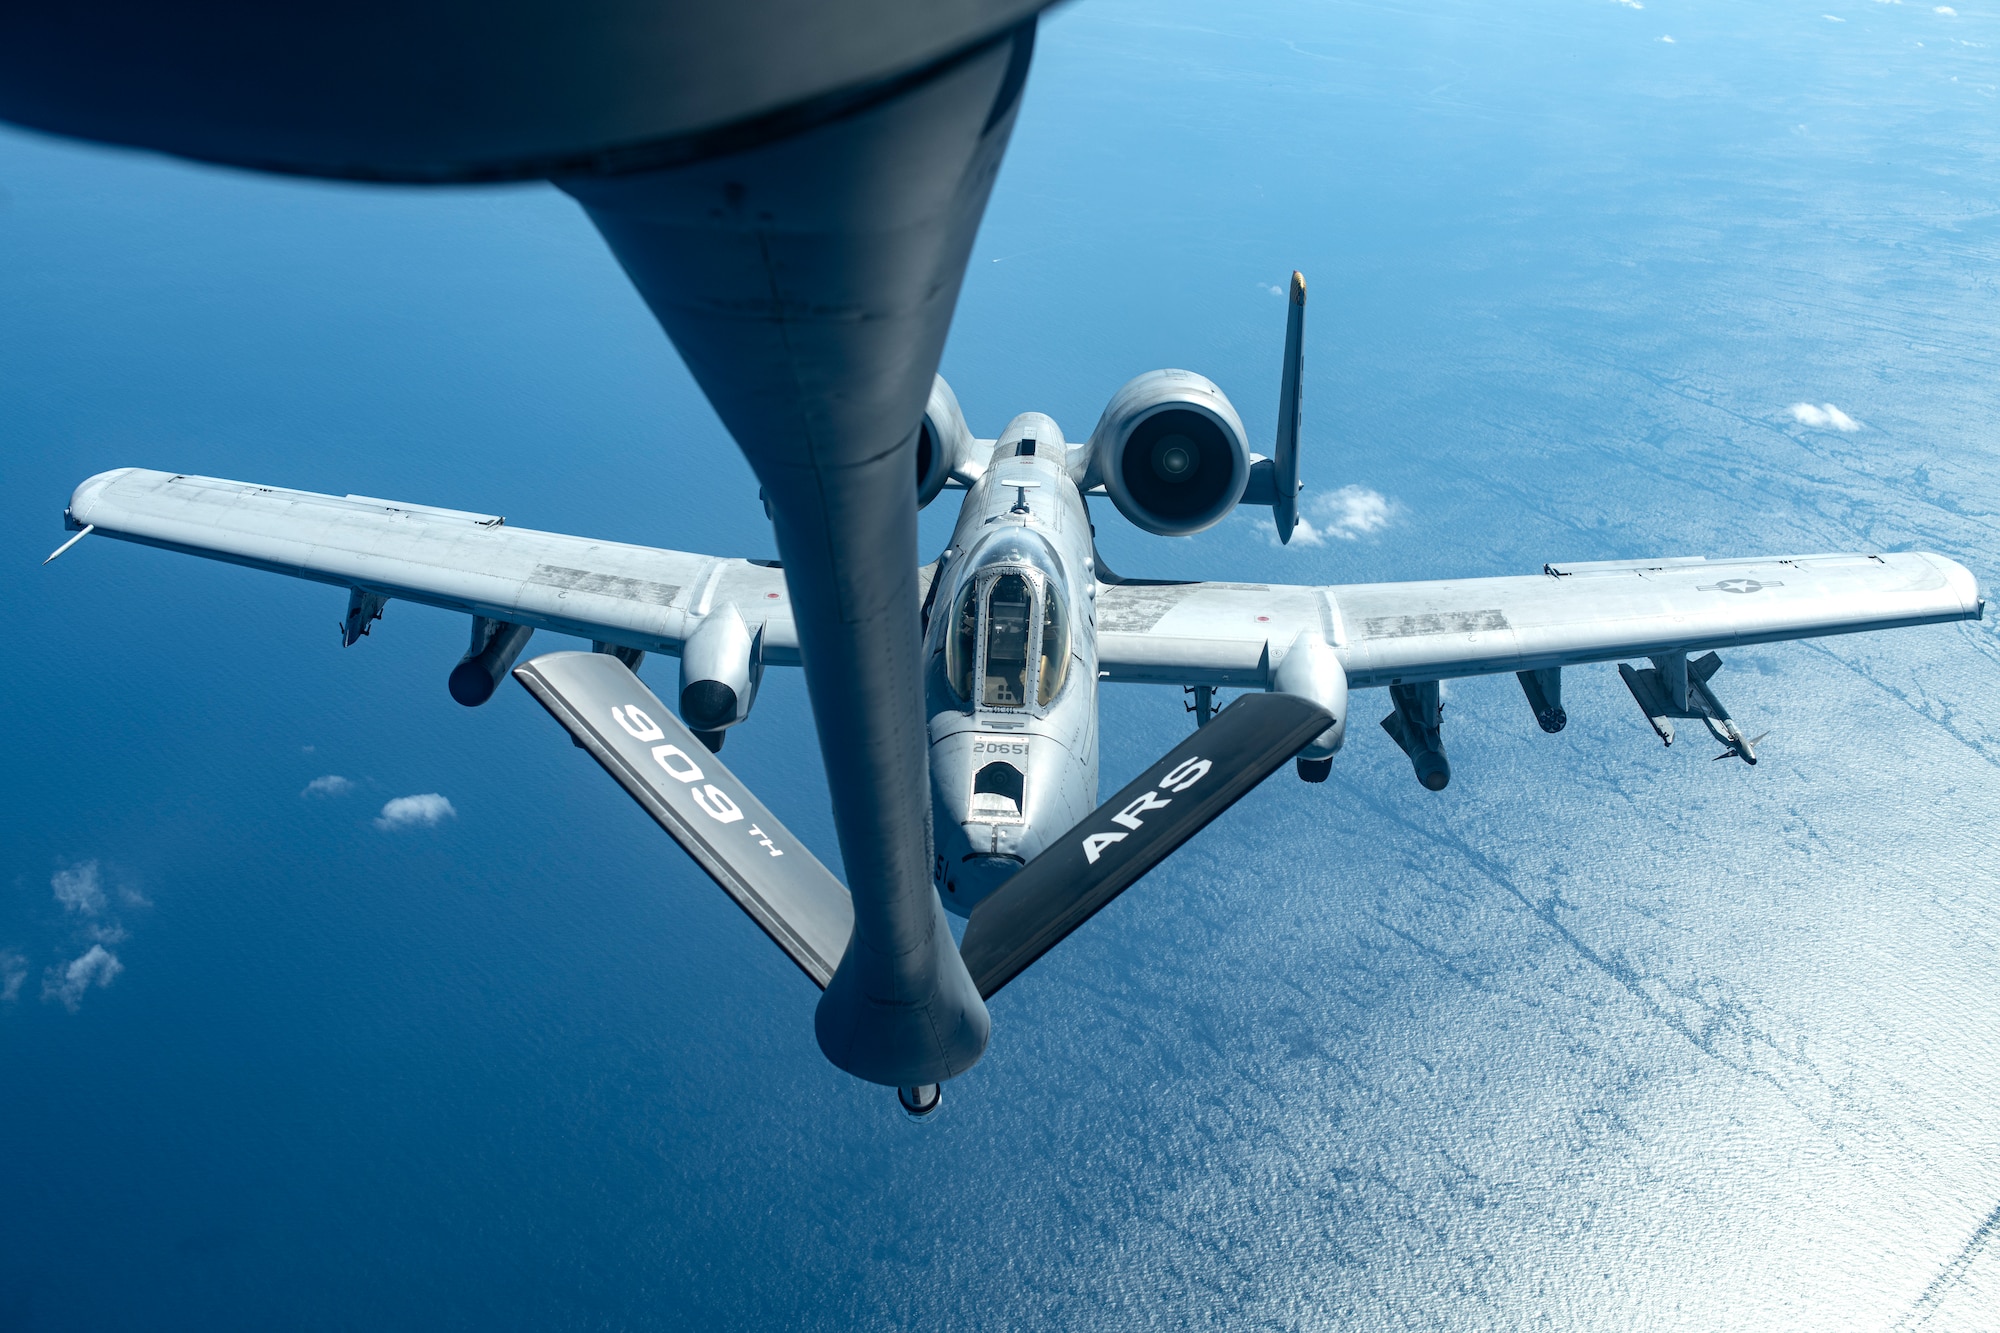 A U.S. Air Force A-10 Thunderbolt II from the 51st Fighter Squadron approaches a 909th Air Refueling Squadron KC-135 Stratotanker for aerial refueling over the Pacific Ocean Oct. 14, 2021. The A-10s were on a combat search and rescue training mission from Osan Air Base, Republic of Korea. (U.S. Air Force photo by Senior Airman Jessi Monte)